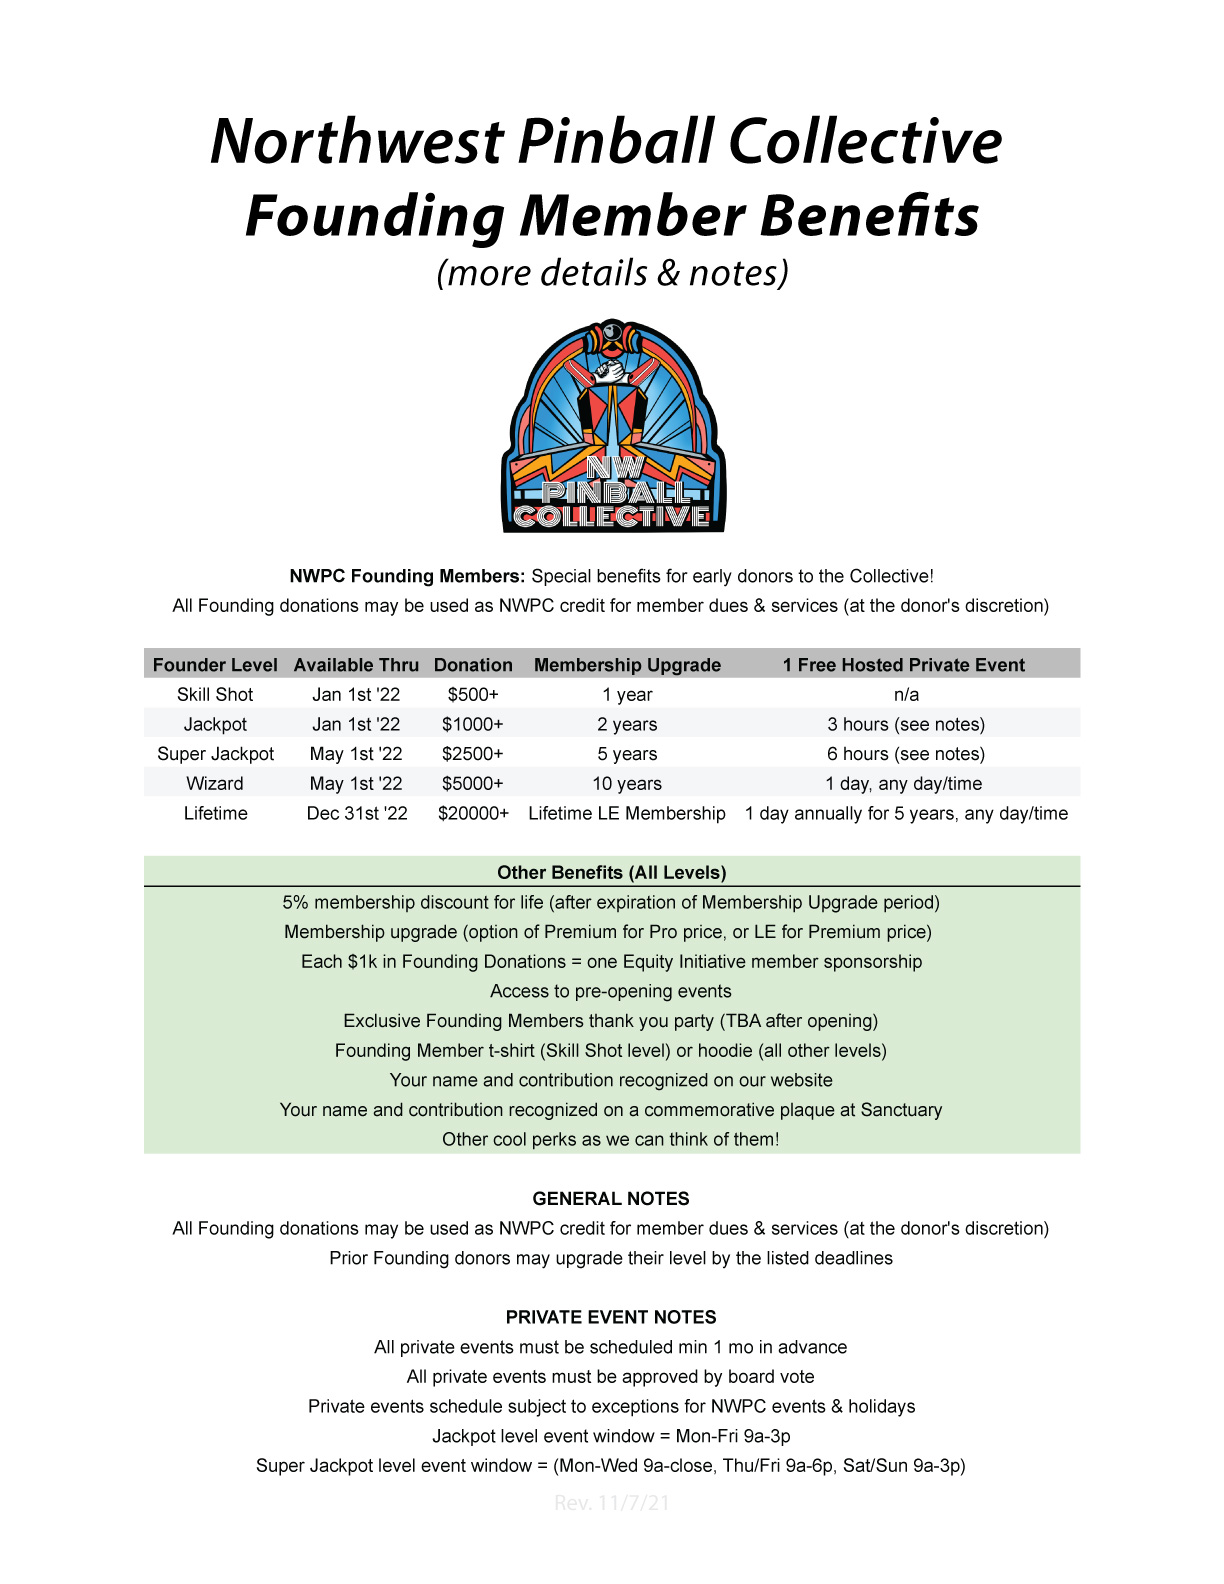 Additional details for NWPC Founding Member Benefits